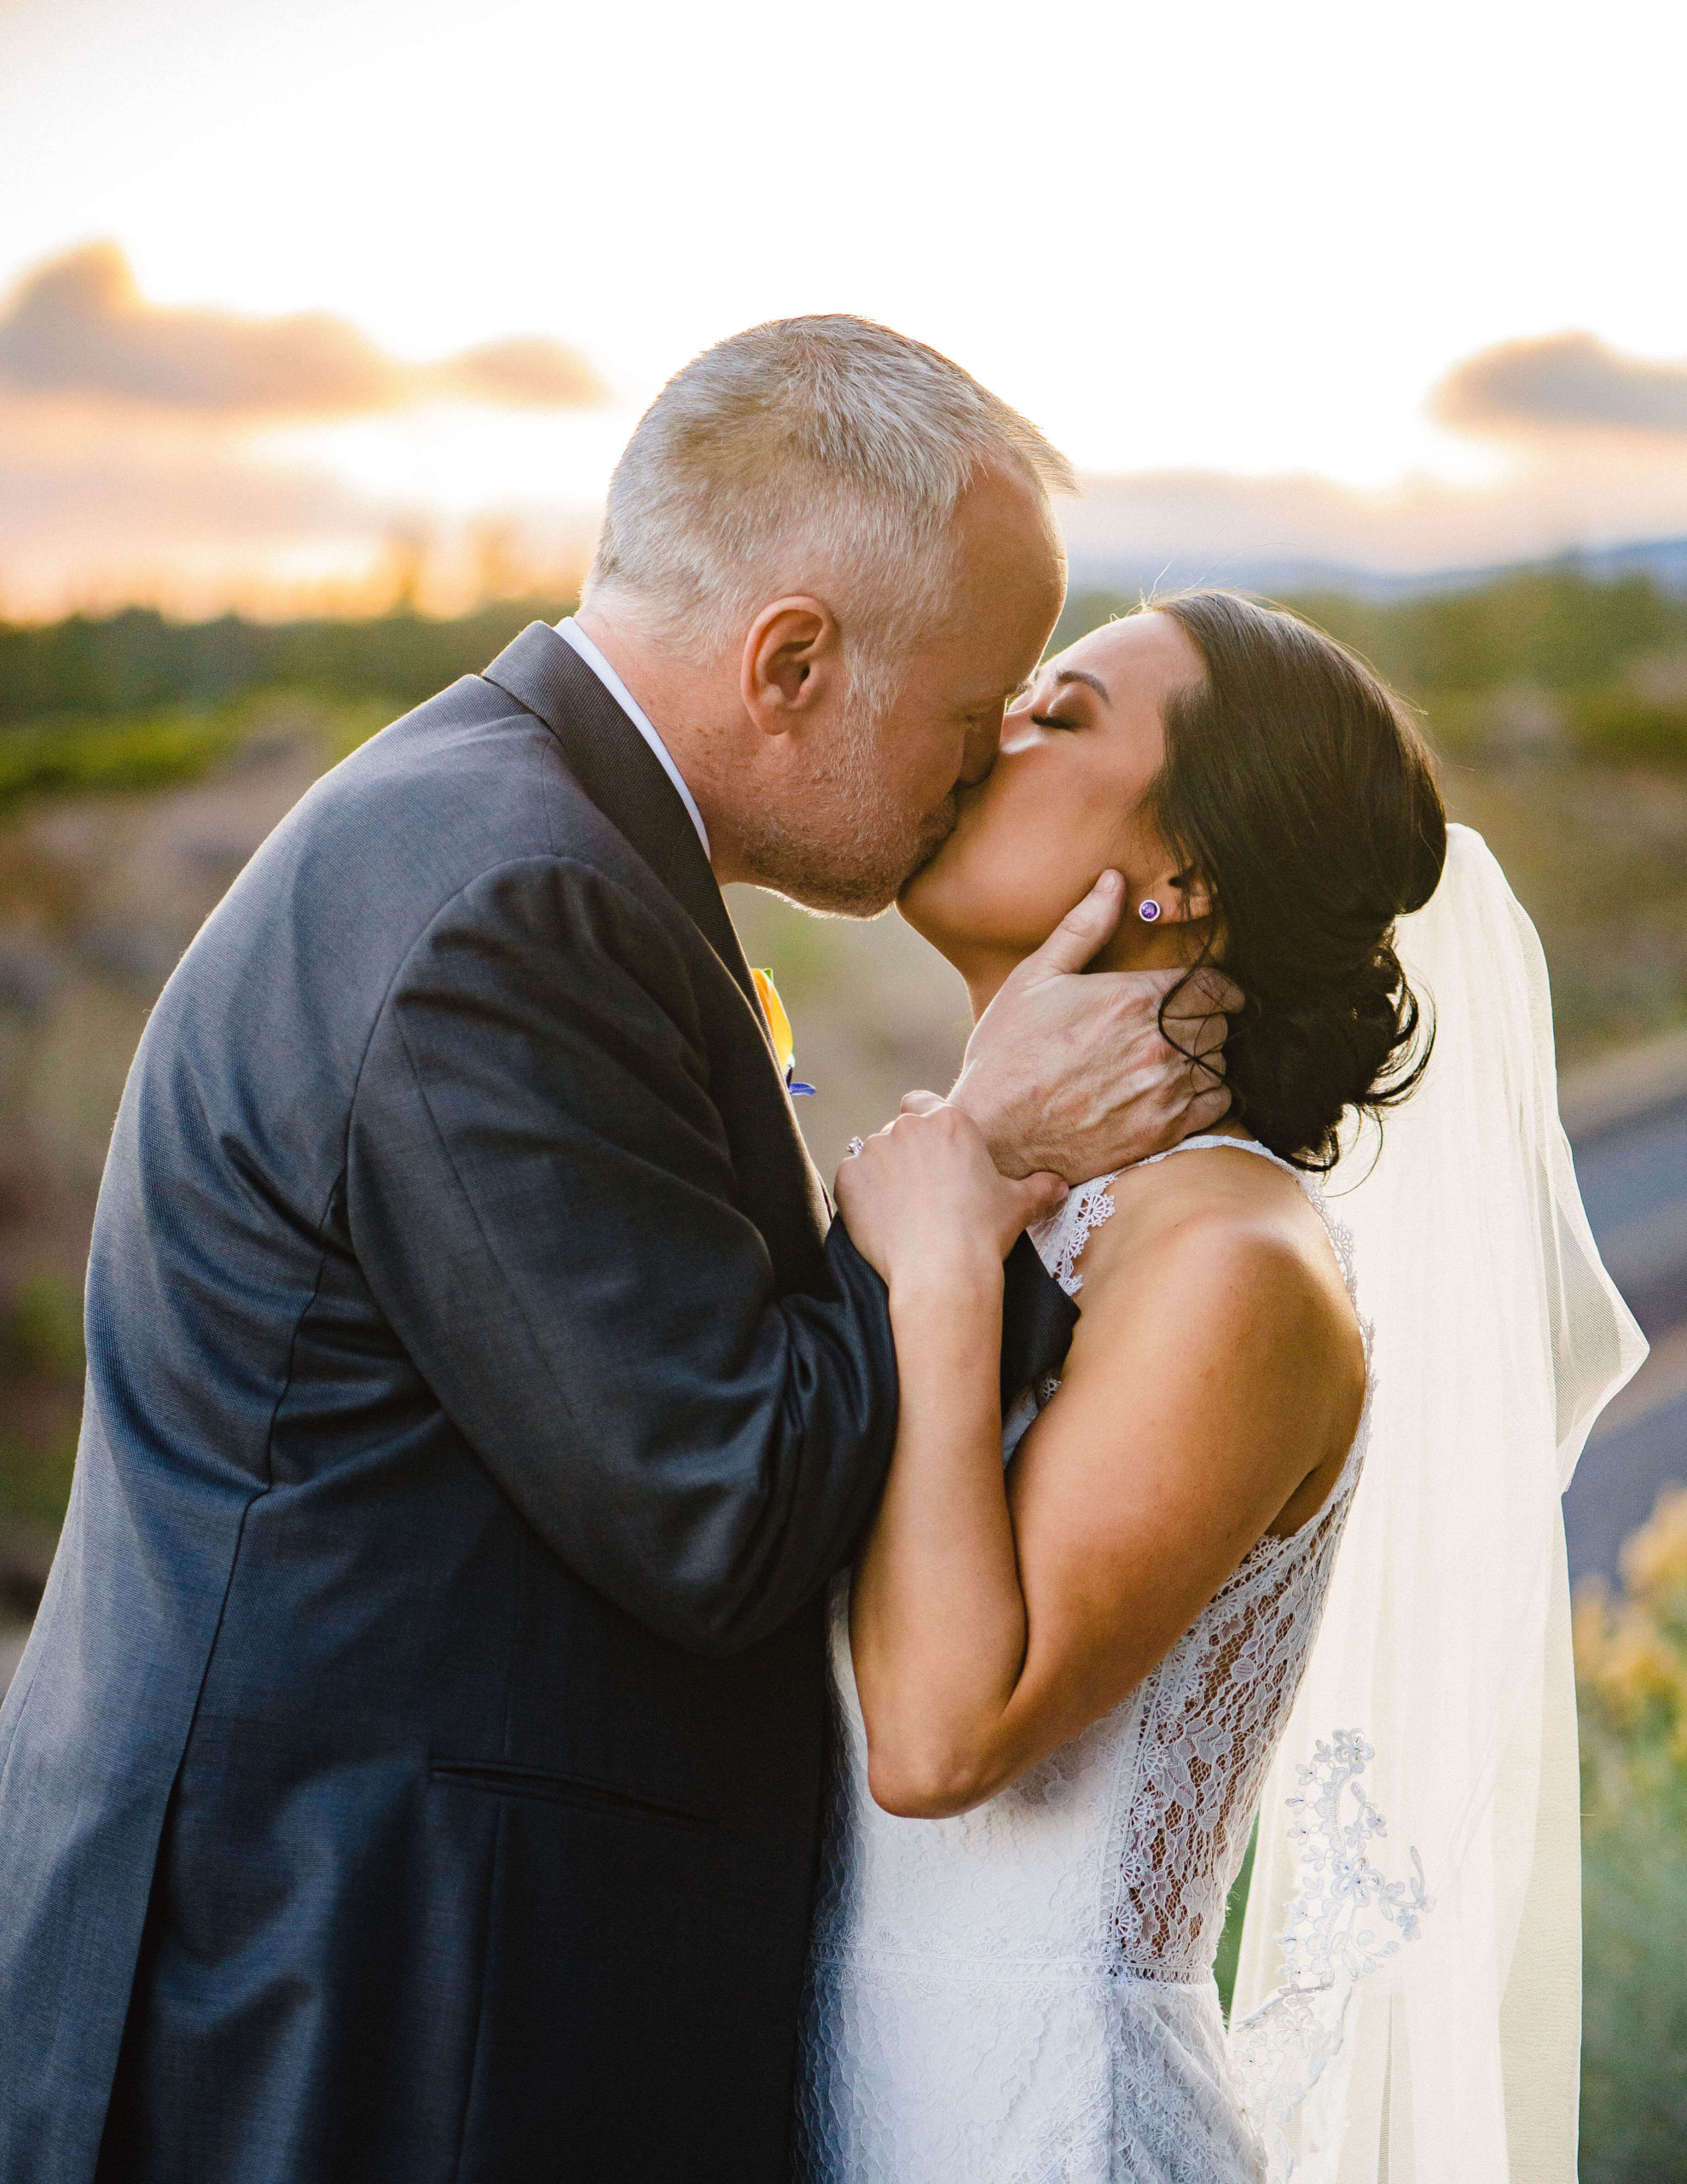 Zotti: Wedding Photographer captures intimate wedding moment at sunset at the Tetherow Resort in Bend, Oregon.